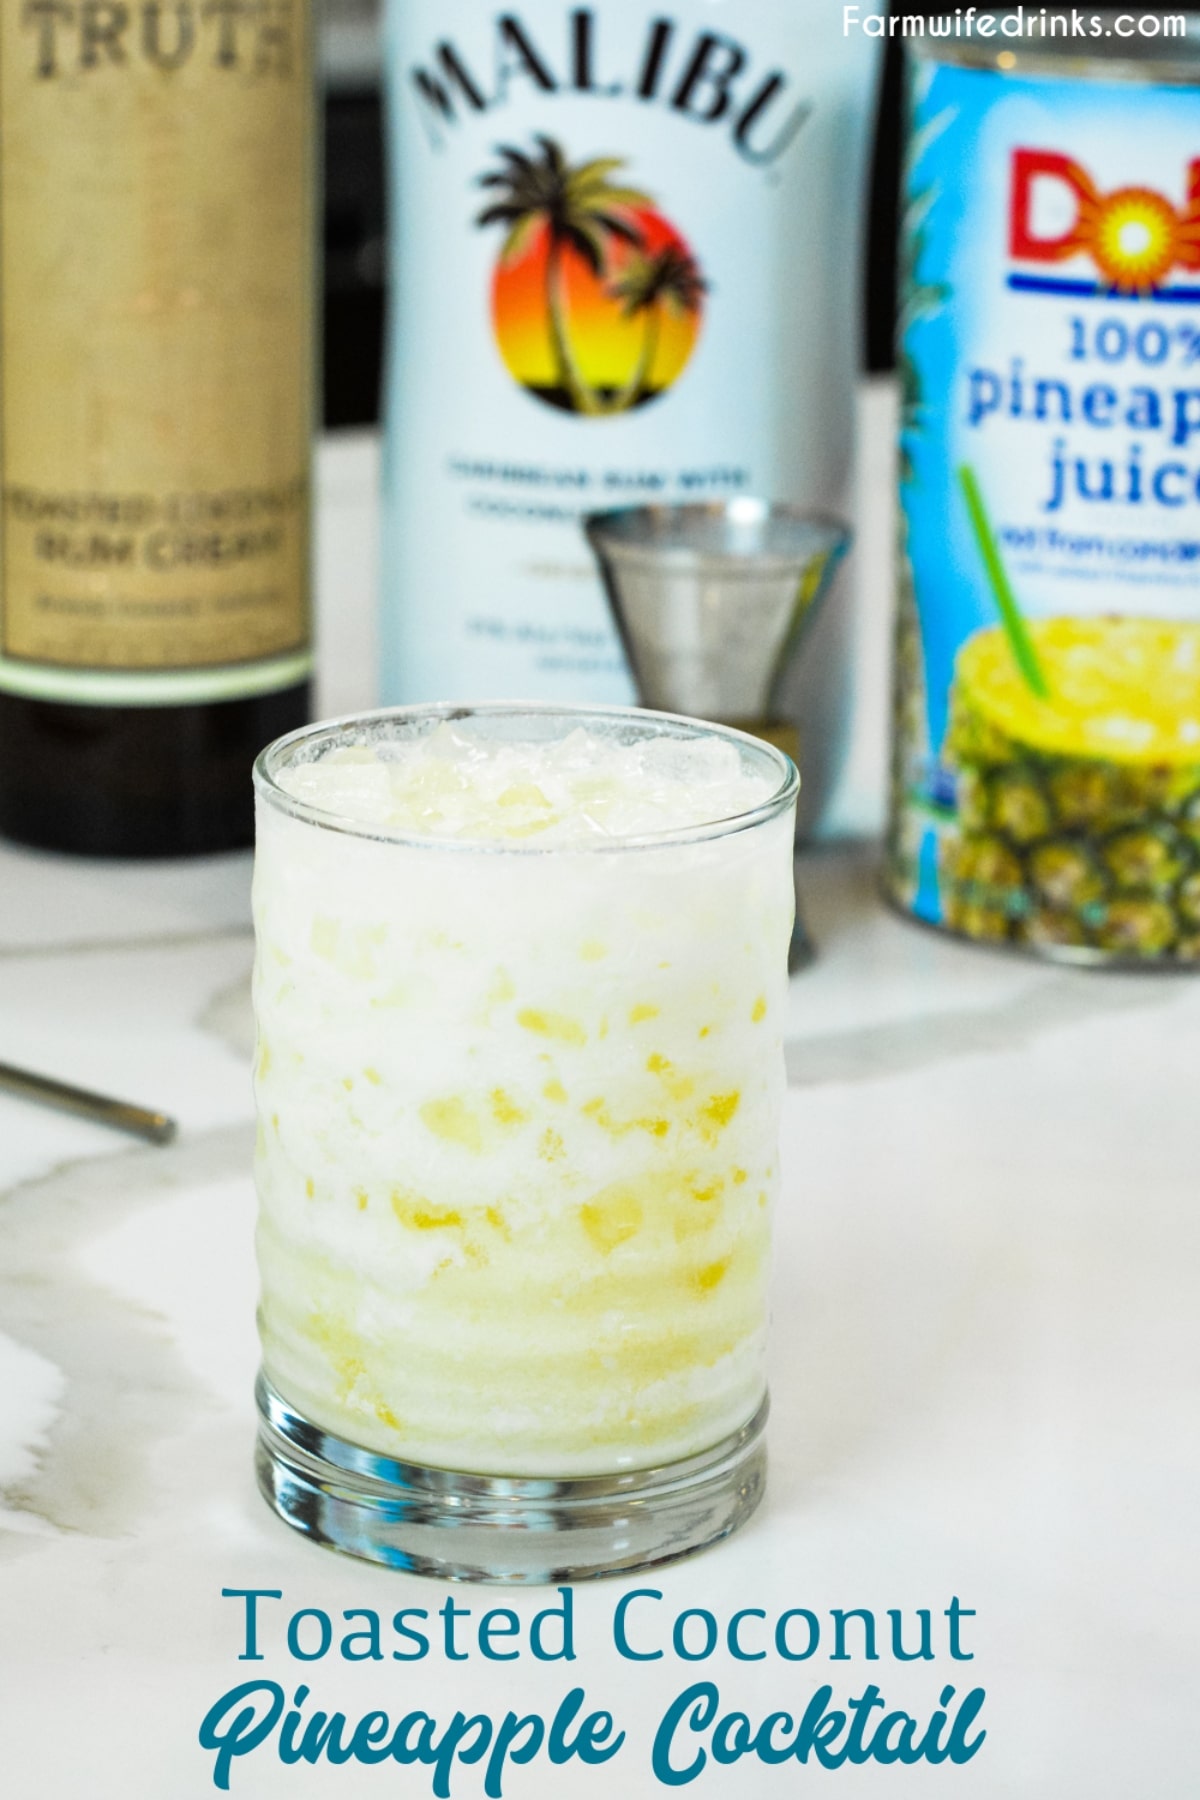 Toasted Coconut Pineapple Cream fruit and rum drinks